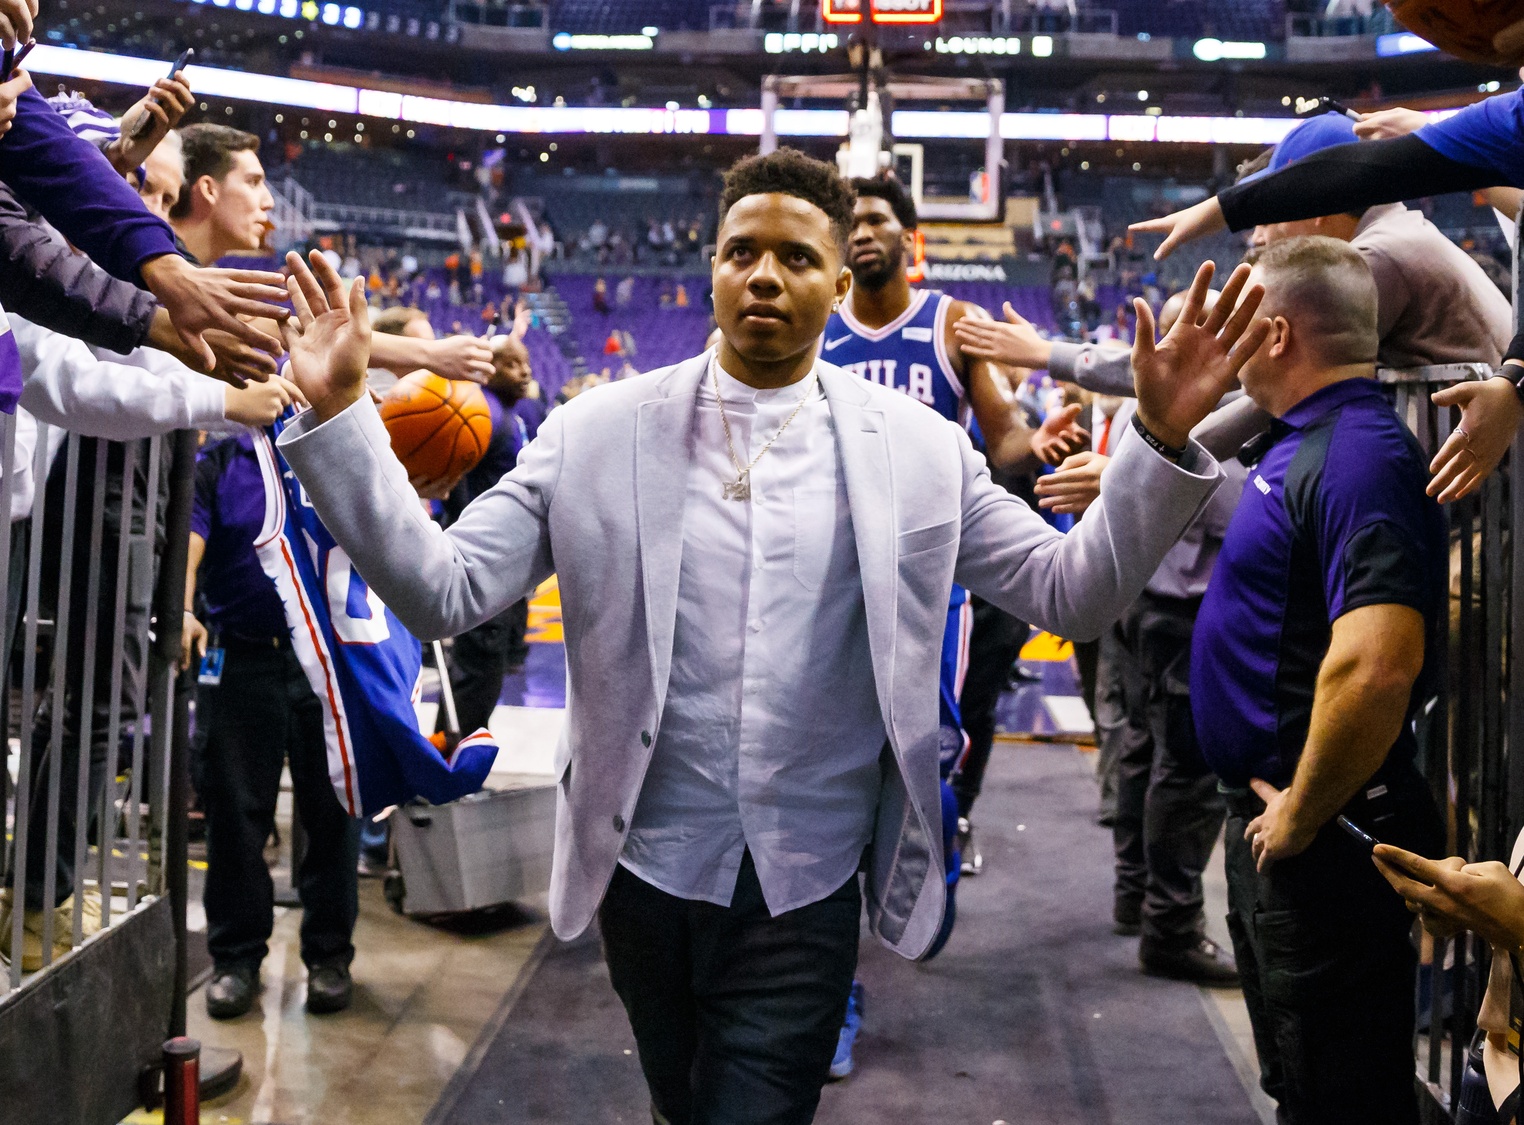 Markelle Fultz Named In NCAA Corruption Probe For Allegedly Taking Money